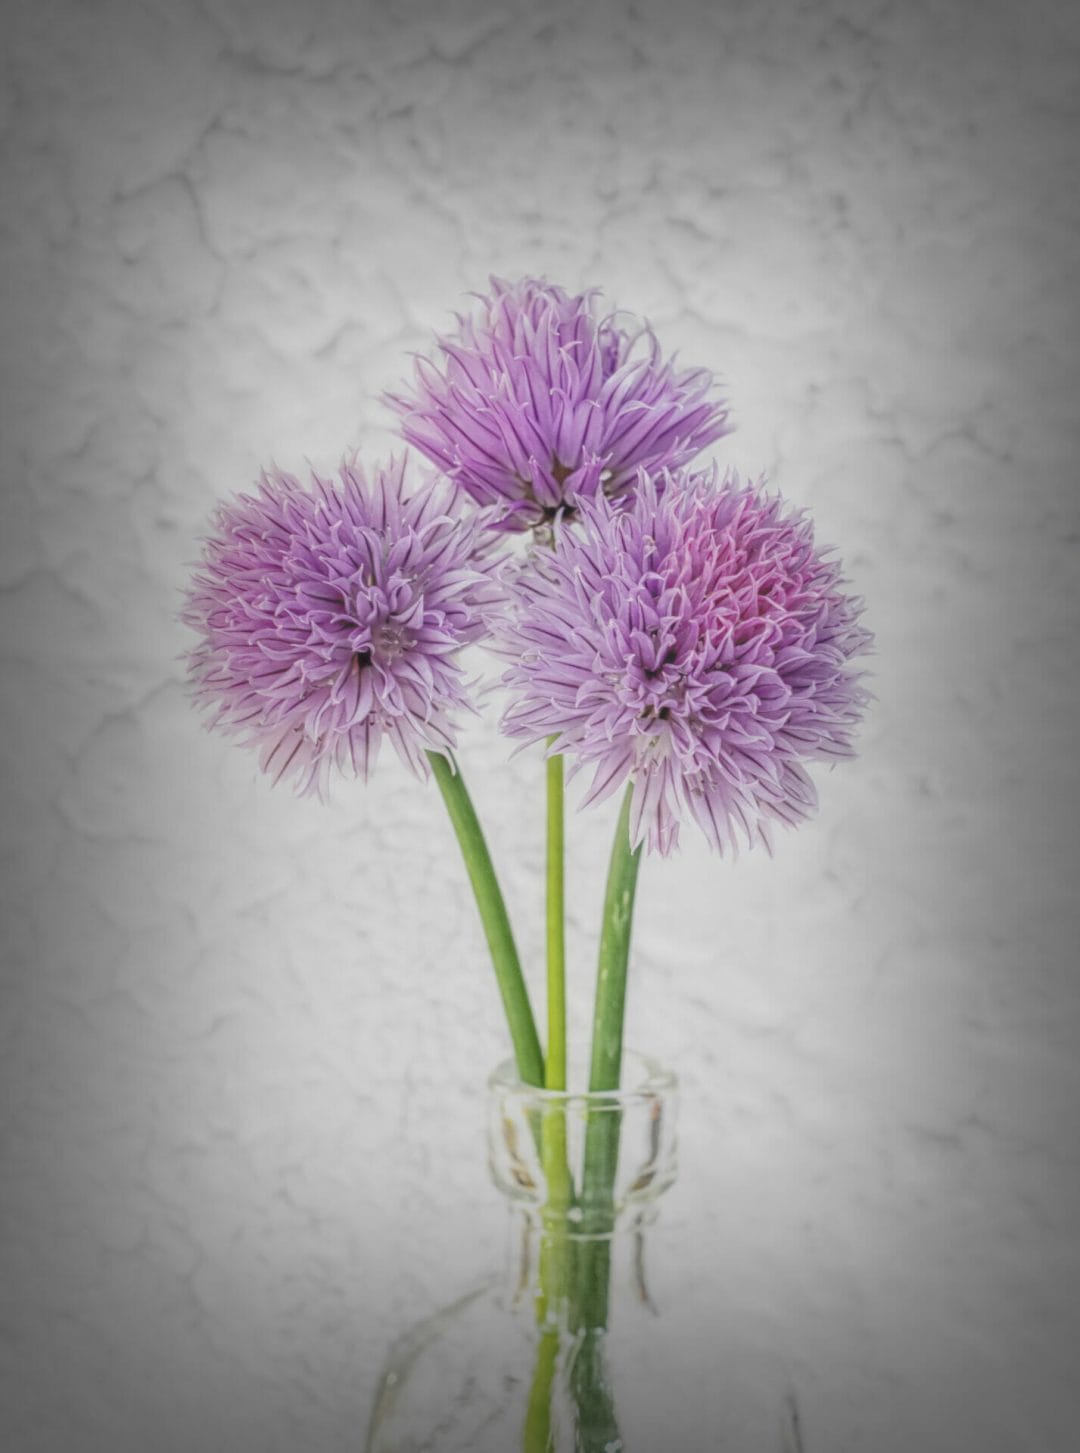 Photo of a still-life photograph showing three purple chive heads in a glass bottle on a textured background - taken at the Welshot Fine Art Floral Photography & Editing Techniques photographic workshop